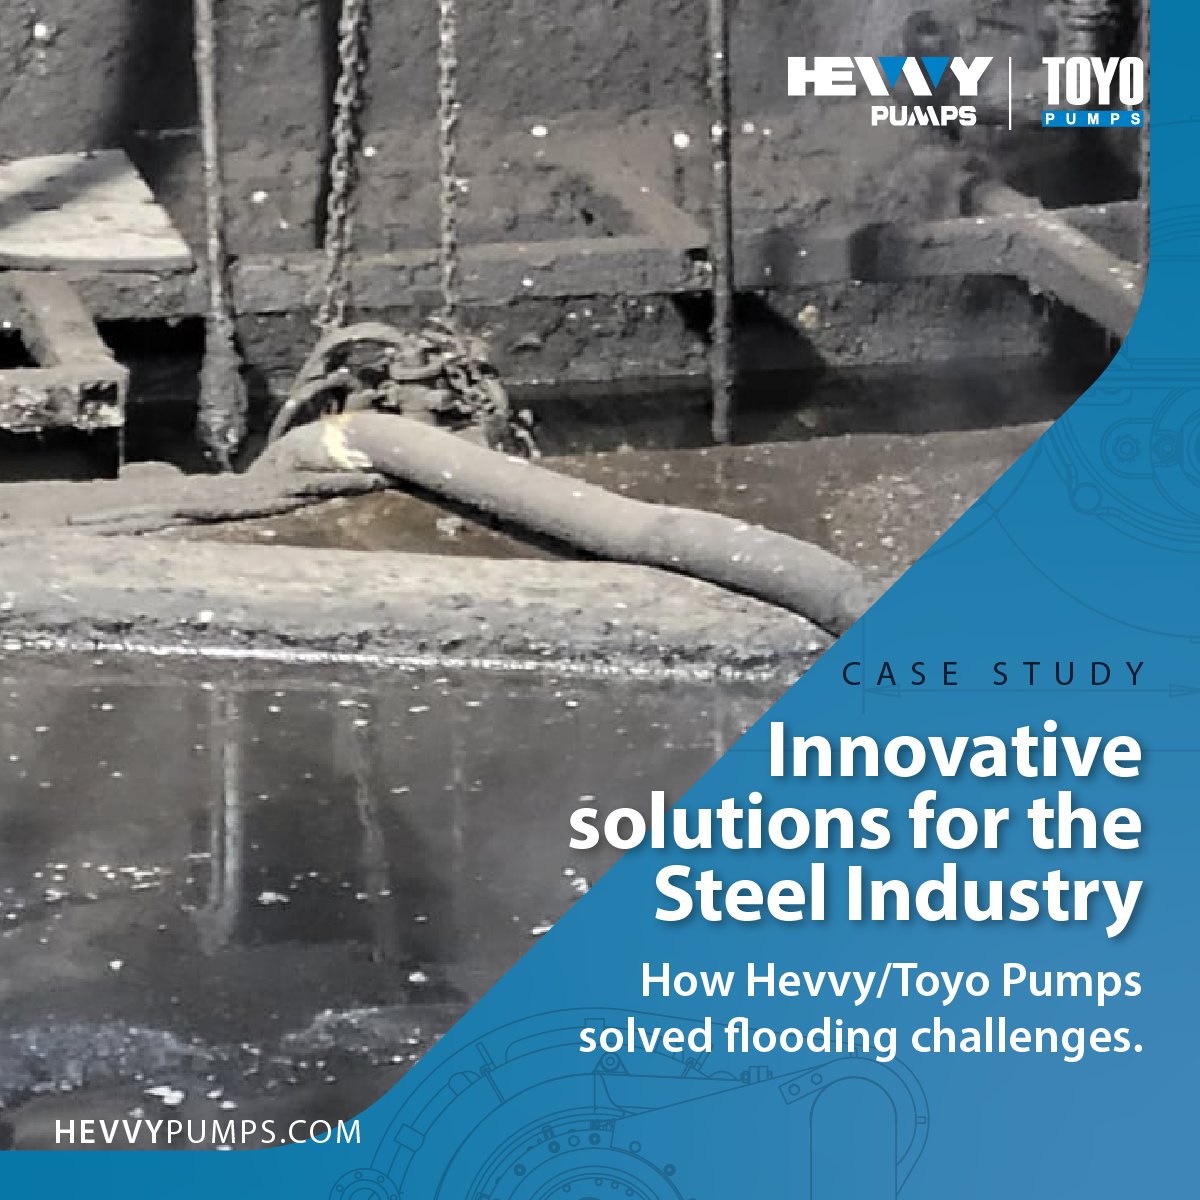 Hevvy/Toyo Pumps provided a tailored solution to a major steel plant in Mexico, mitigating safety risks and surpassing expectations. For your pumping needs, contact us at solutions@hevvypumps.com. 

#AISTech2024 #AISTech #SteelIndustry